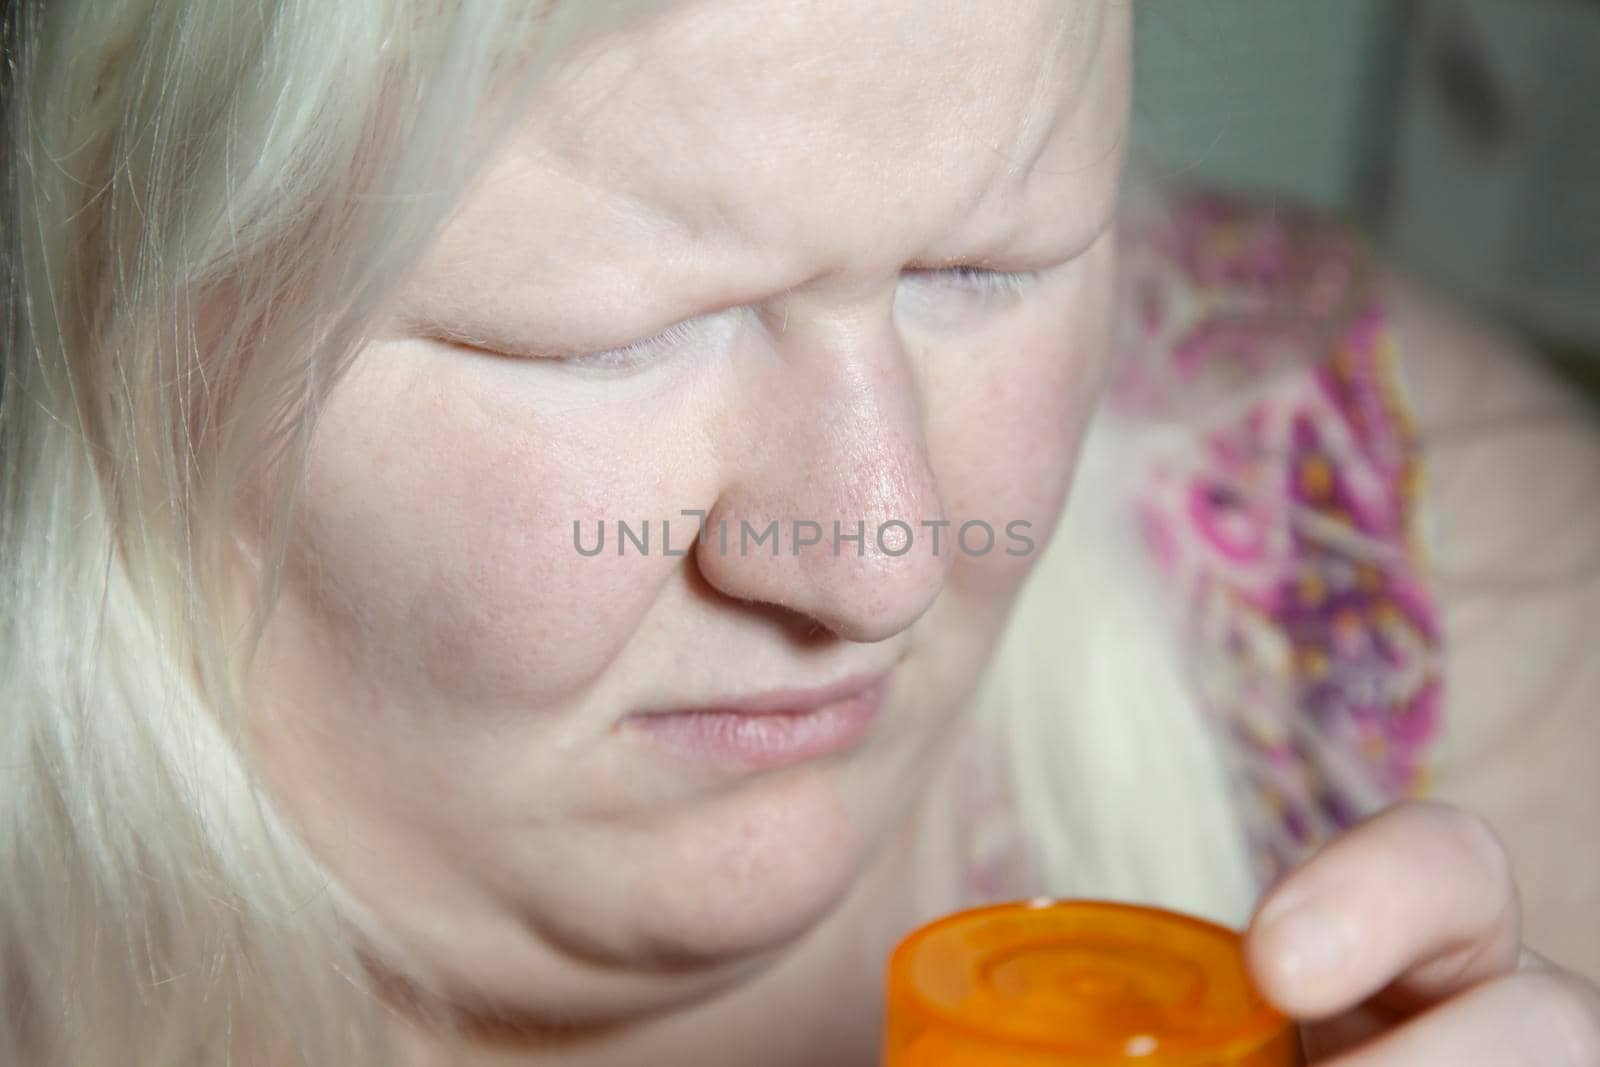 Woman looking sadly at an empty medication bottle